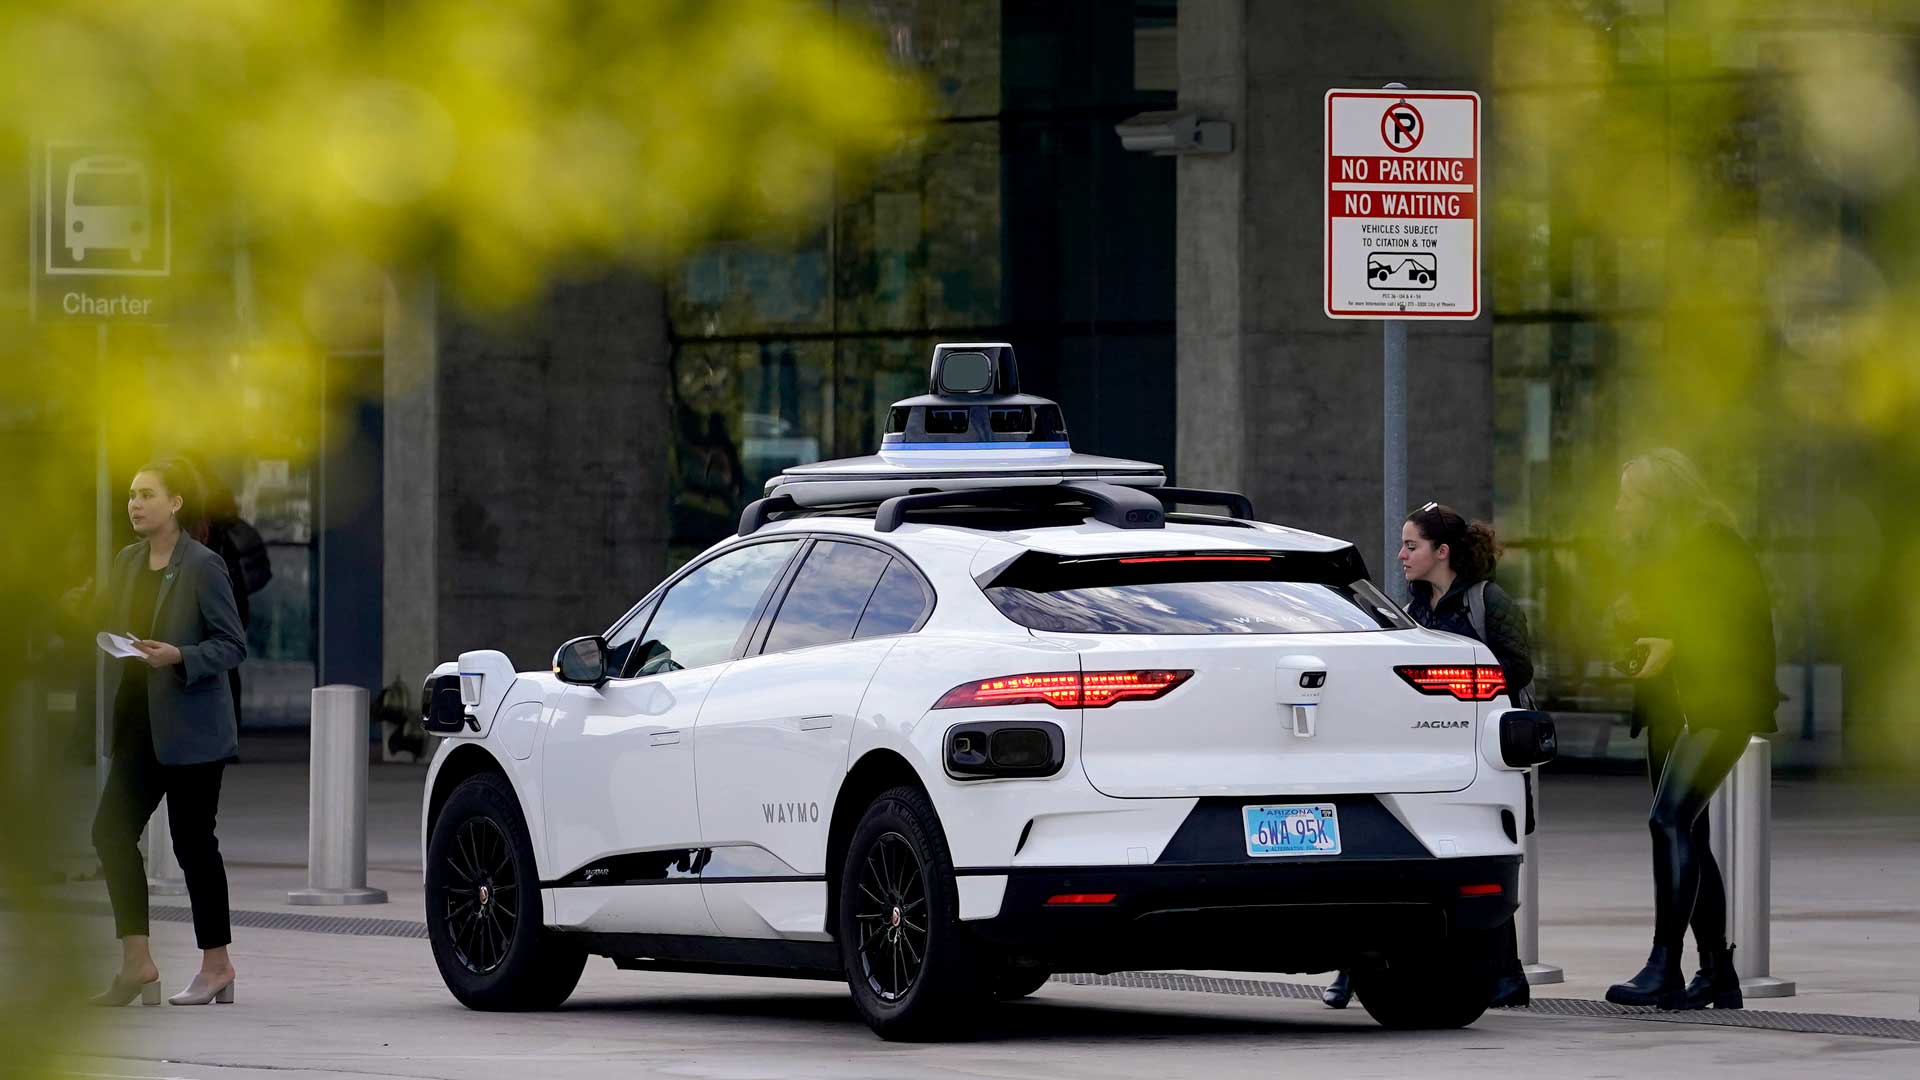 A Waymo self-driving vehicle sits curbside on Dec. 16, 2022, at the Sky Harbor International Airport Sky Train facility in Phoenix. Self-driving car pioneer Waymo announced Thursday, May 4, 2023, that its robotaxis will be able to carry passengers through most of the Phoenix area for the first time. 